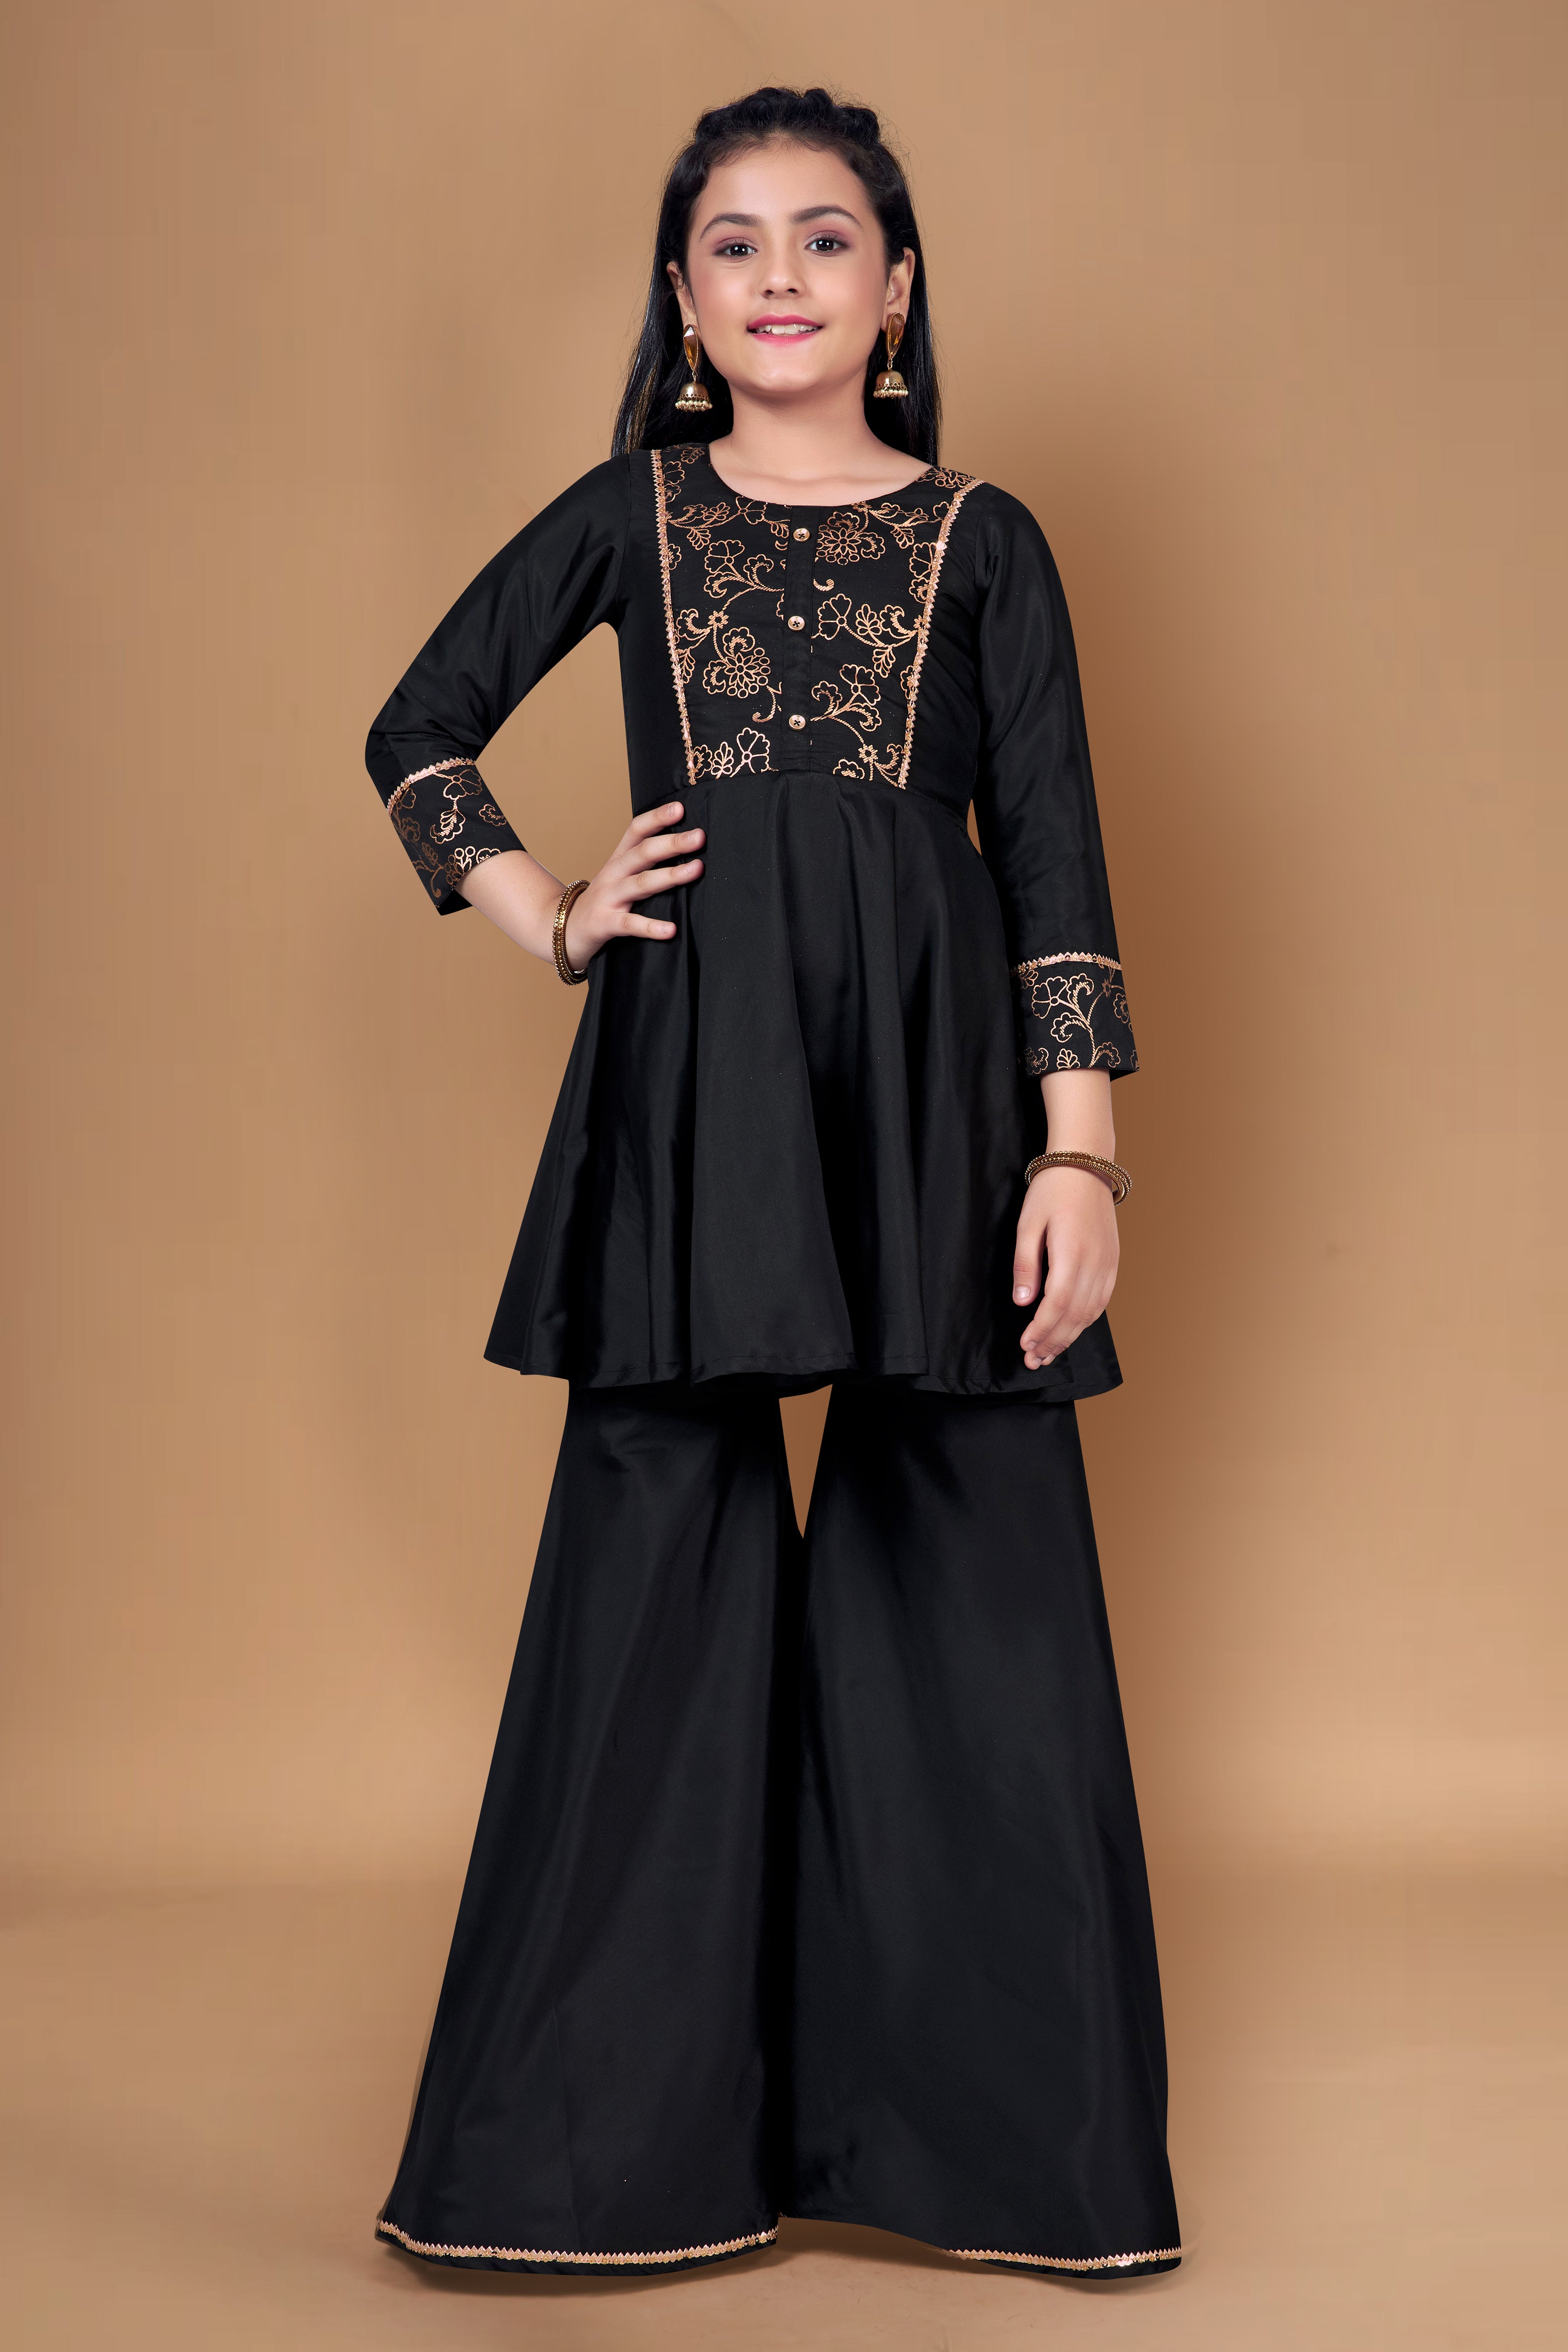 Sharara Dress for Girls: Pick the Best One for This Diwali